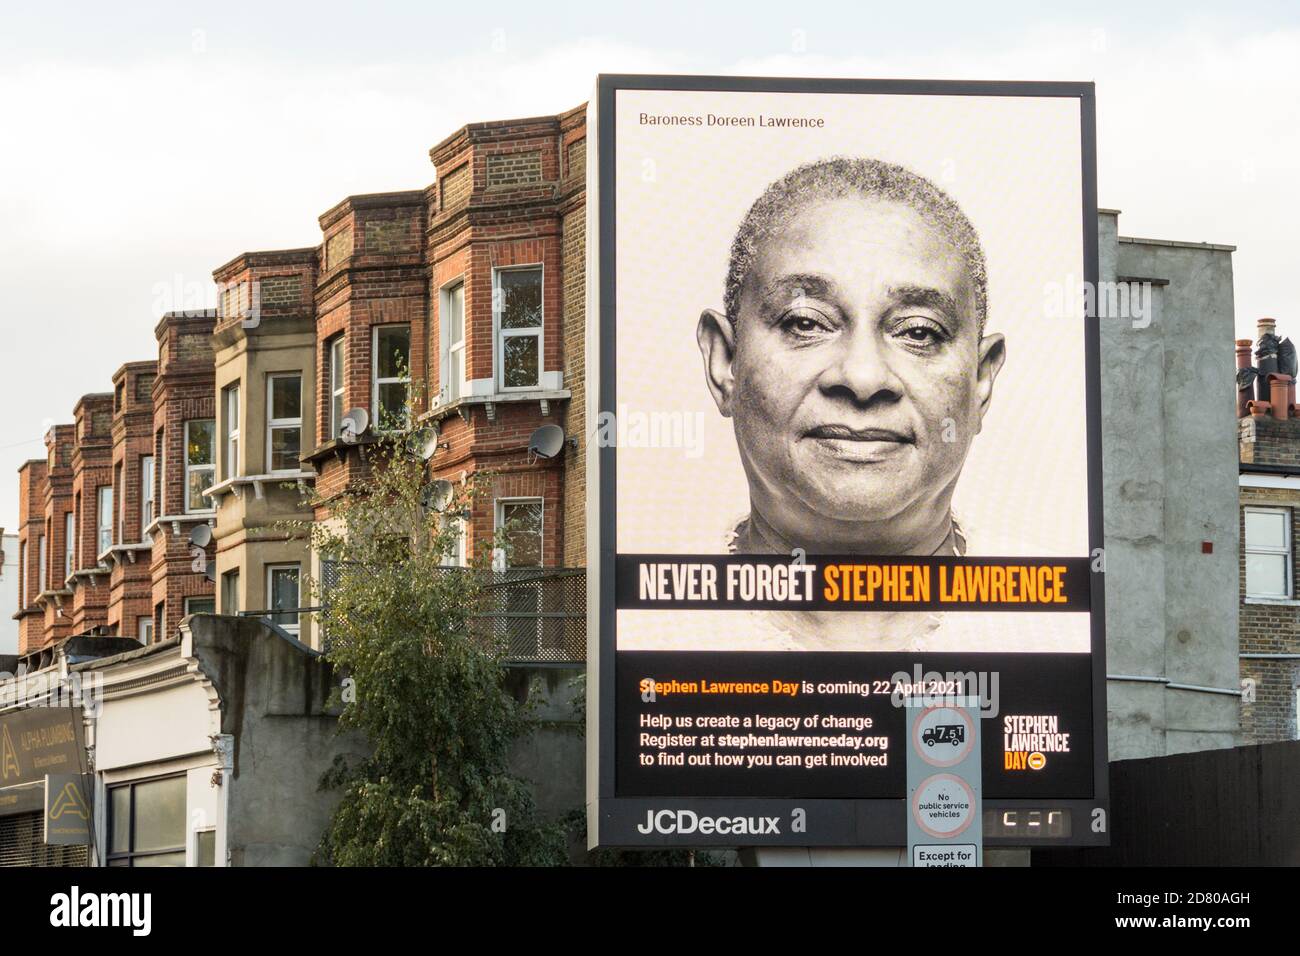 Baroness Doreen Lawrence and a Never Forget Stephen Lawrence electronic billboard in Wandsworth, southwest London, UK Stock Photo